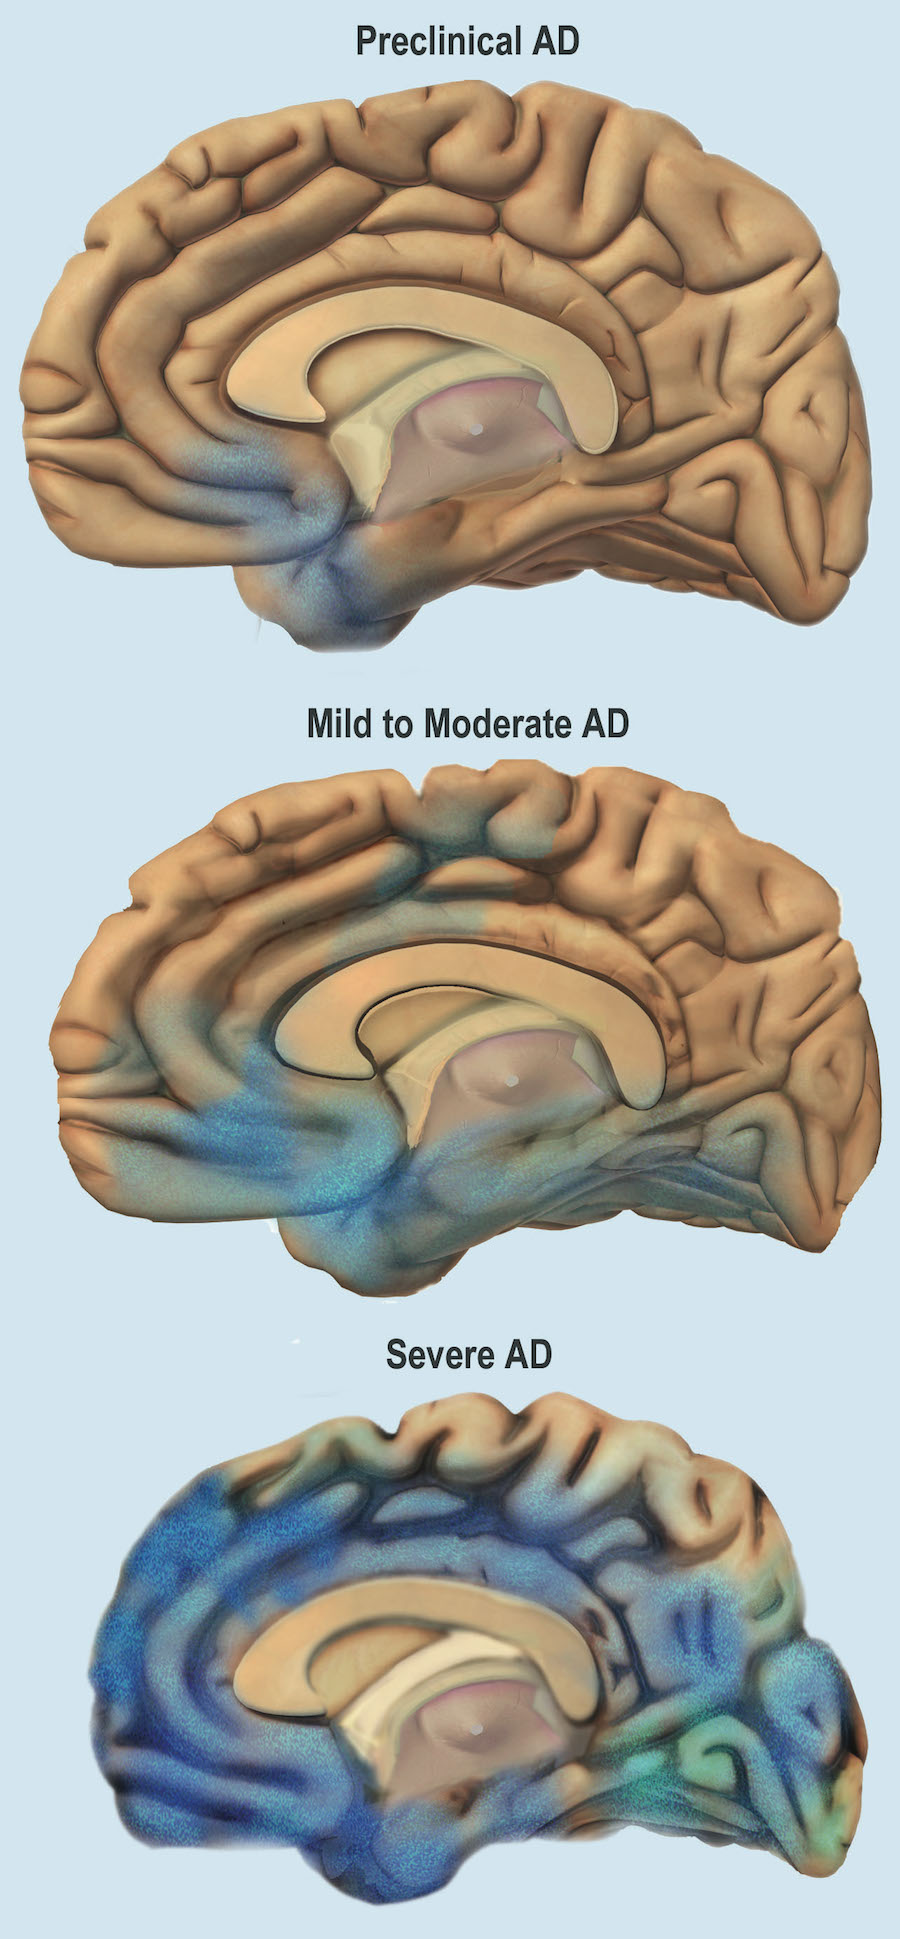 Various stages of brain deterioration due to Alzheimer's from pre-clinical, mild to moderate, and severe stages